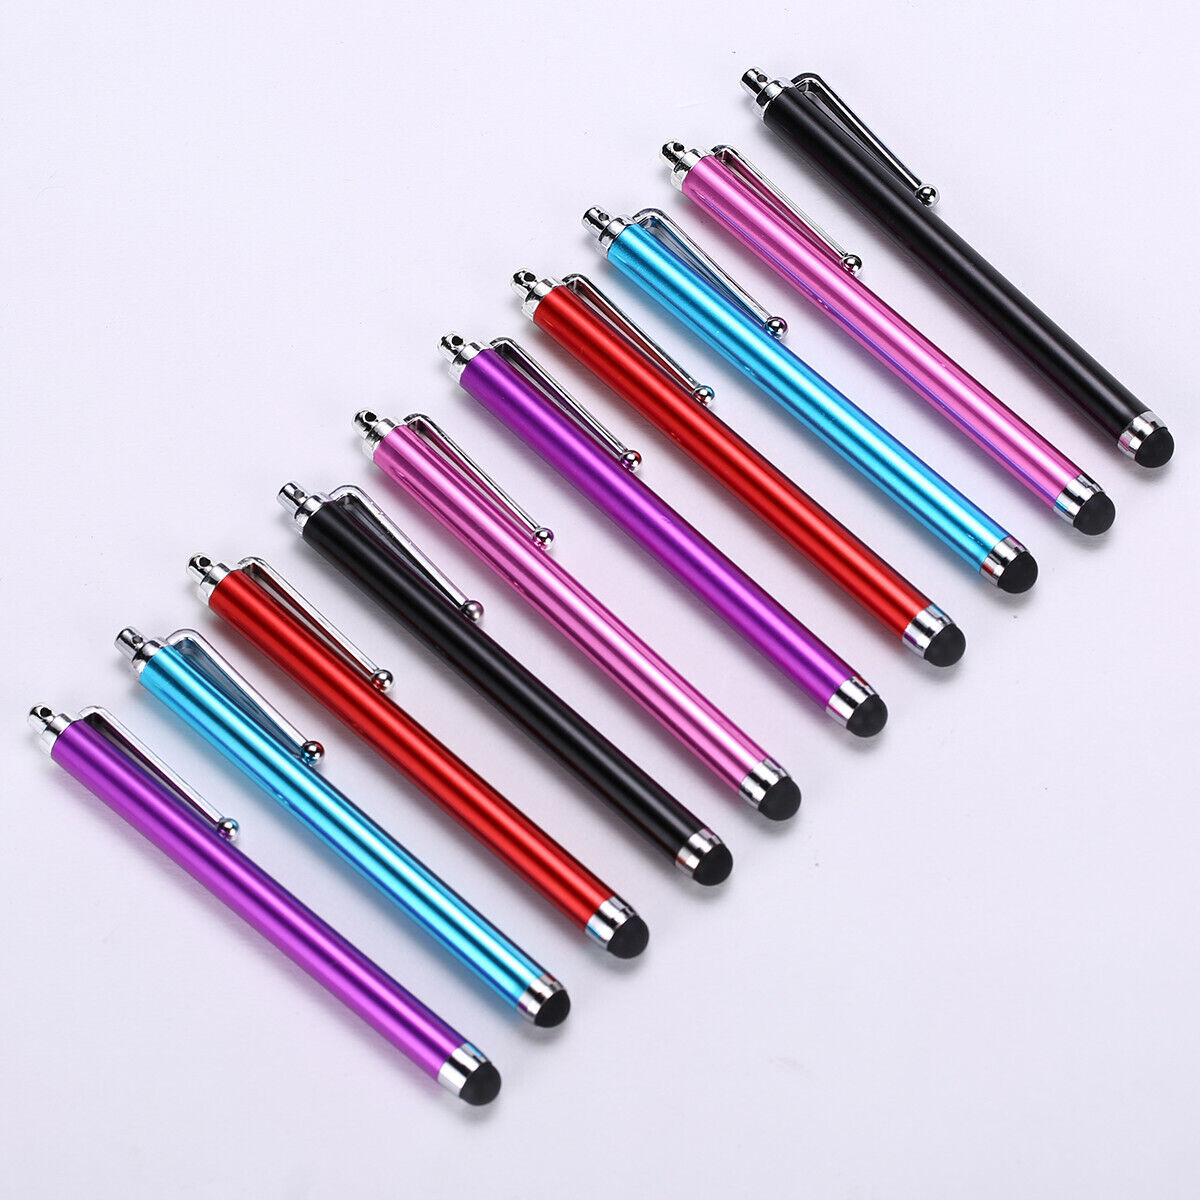 10 Capacitive Touch Screen Stylus Pen Universal For iPhone iPad Samsung Tablet Ombar Universal Touch Screen Stylus/Pen - фотография #11